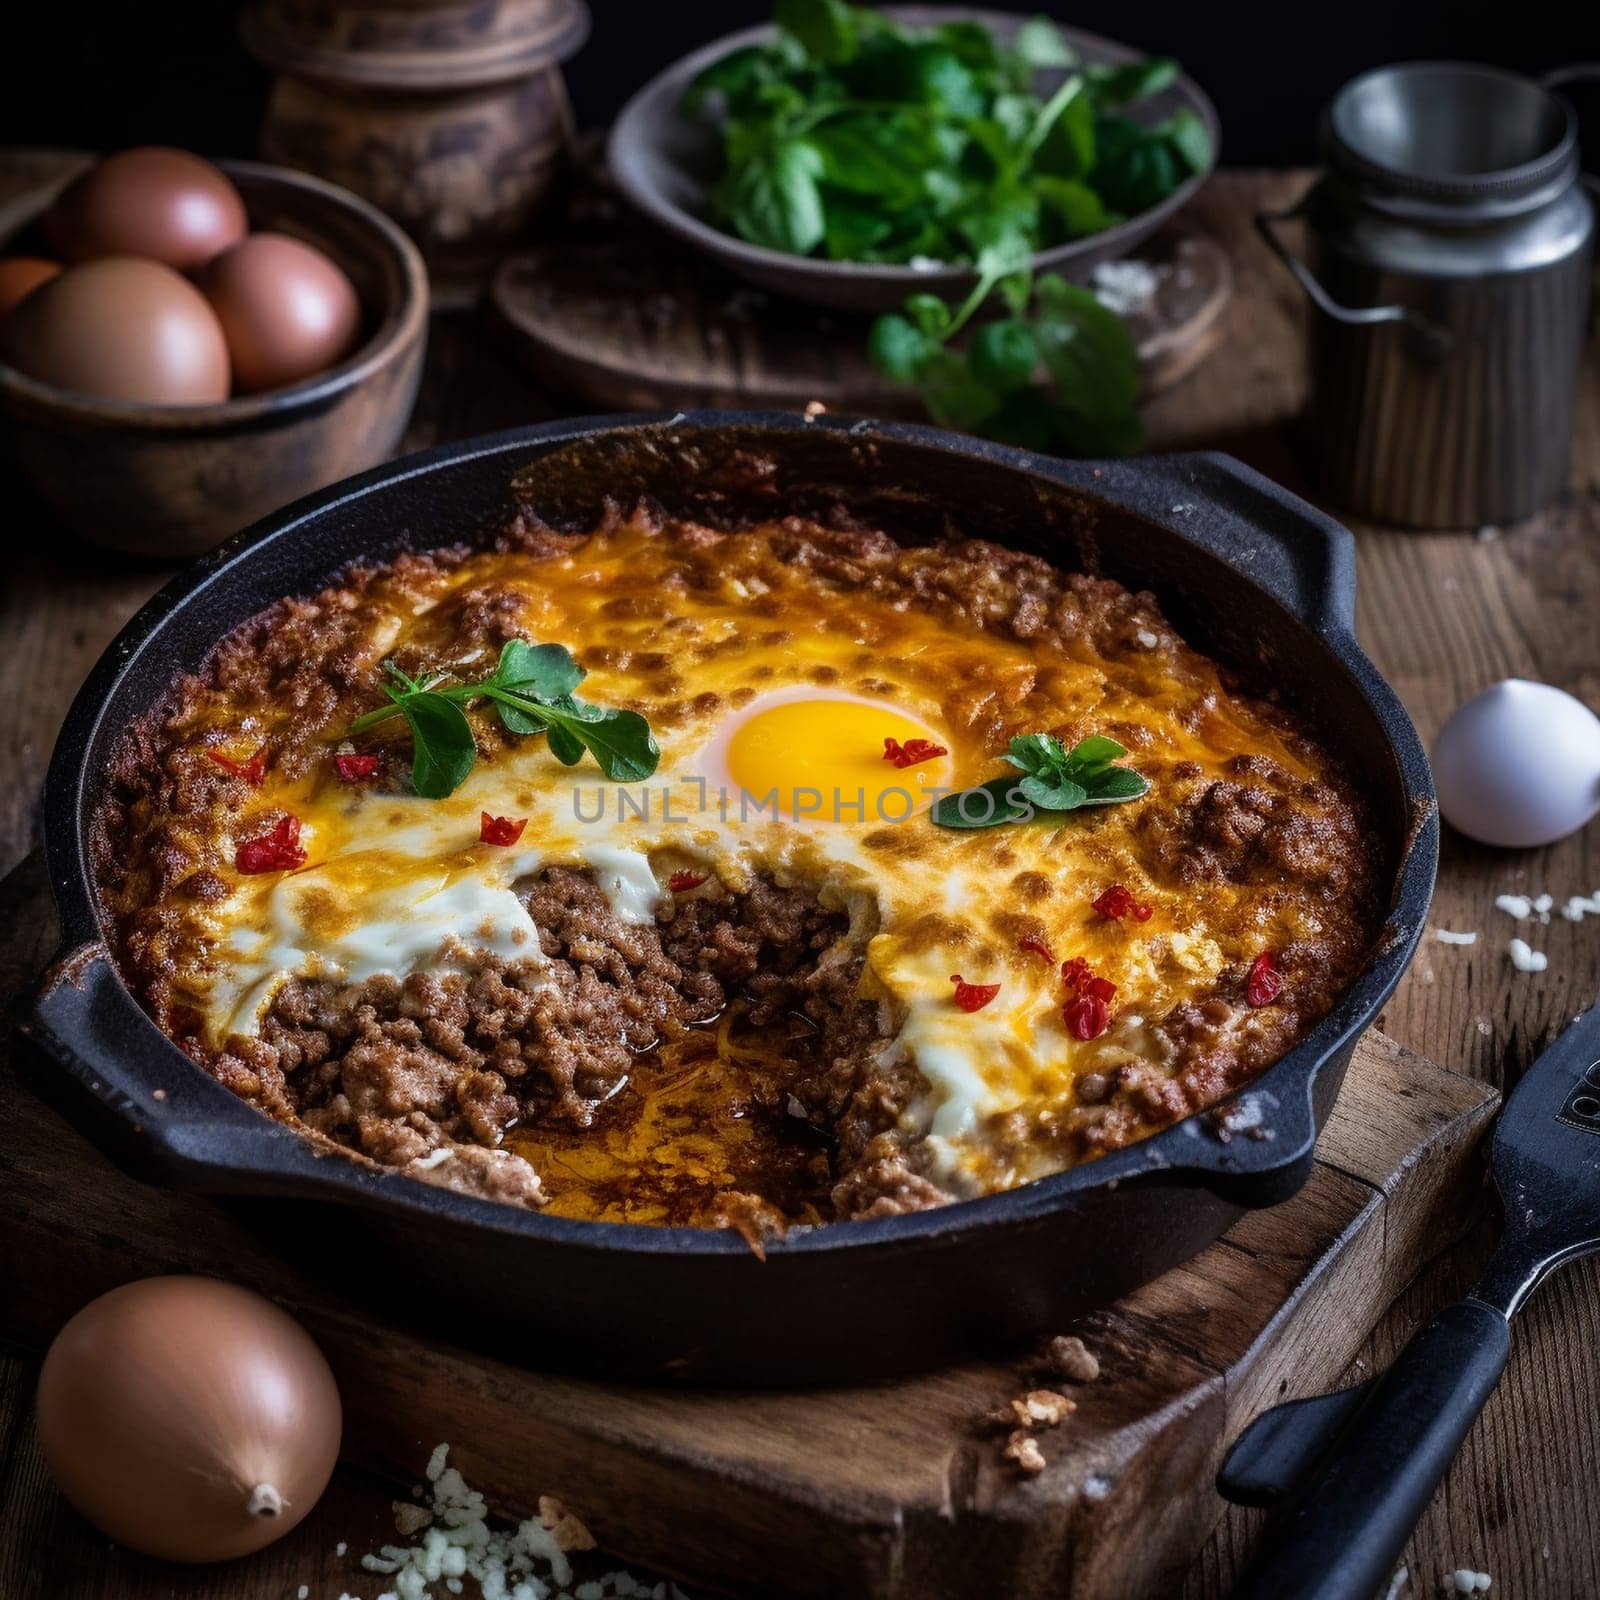 South African Bobotie: Warm and Aromatic Spiced Minced Meat Bake with Yellow Rice and Chutney by Sahin